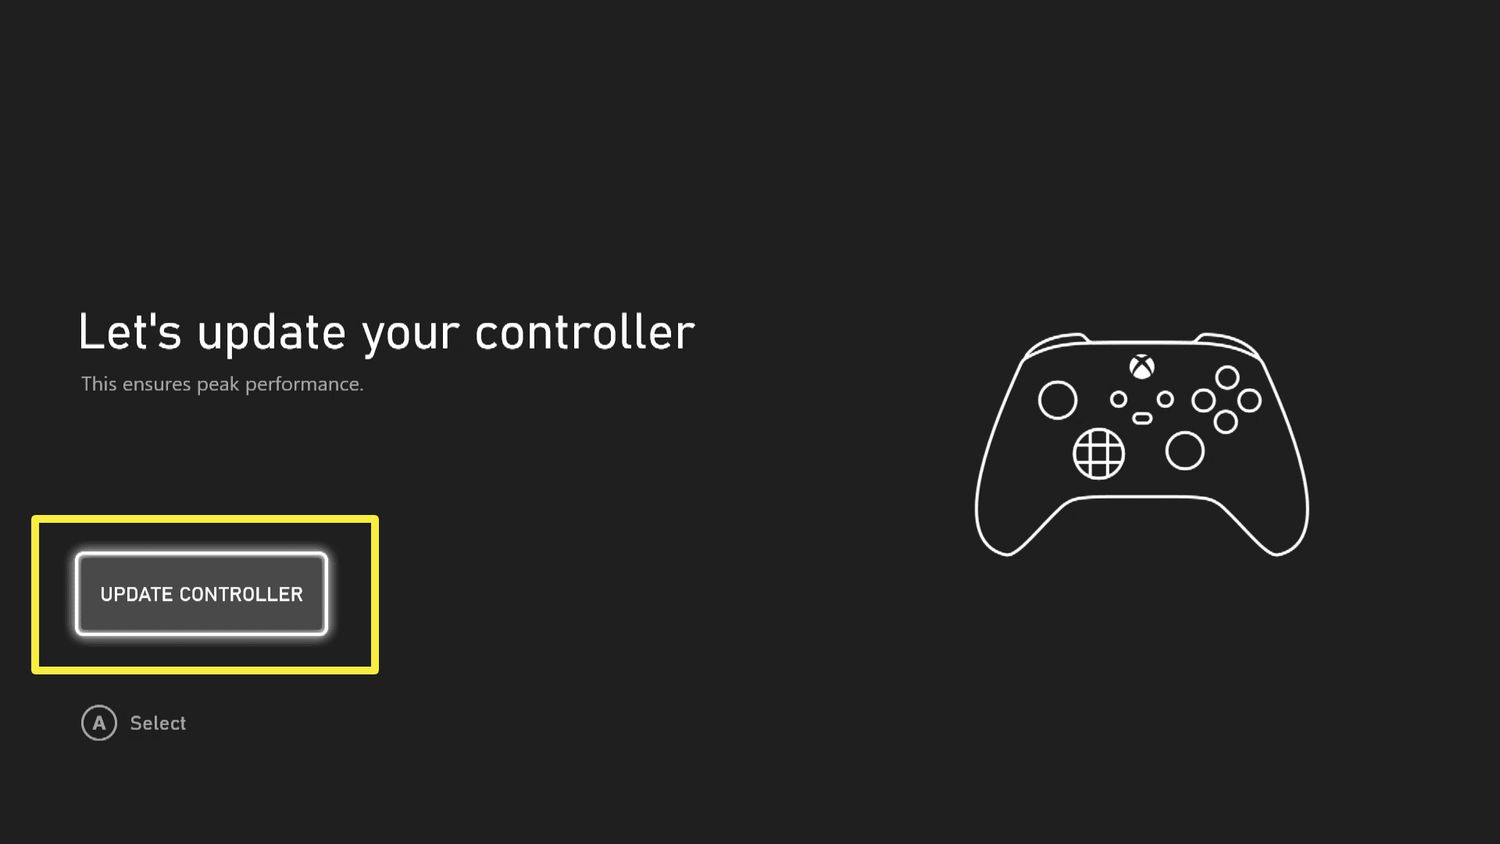 upgrade your controller